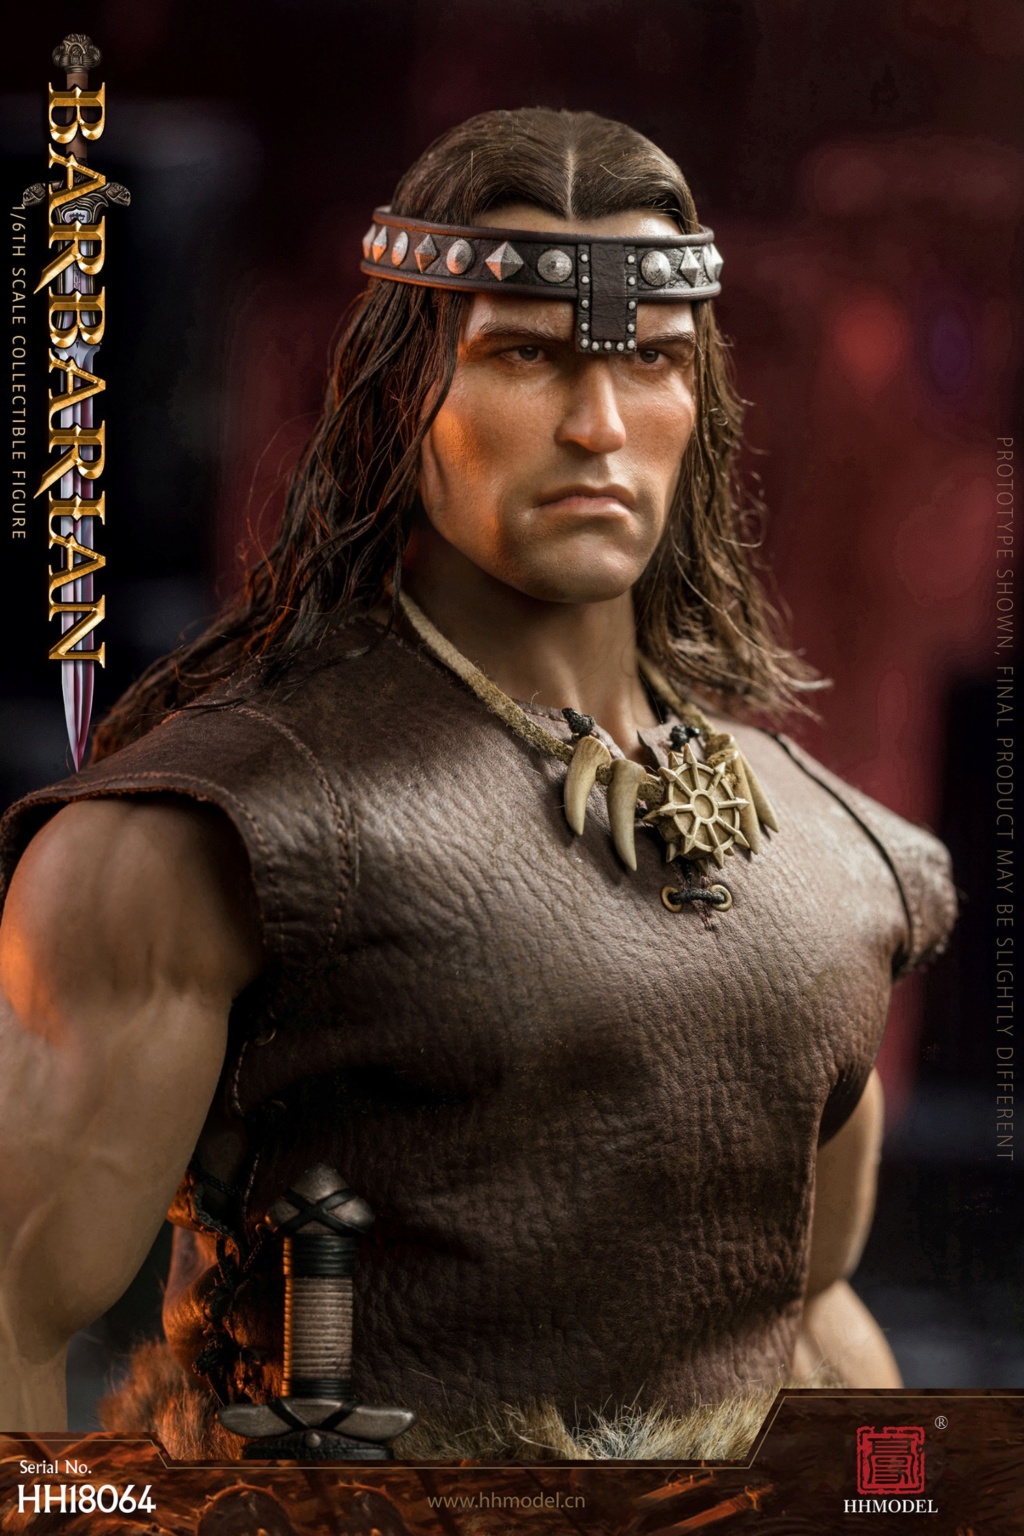 movie-based - NEW PRODUCT: Haoyutoys: HH18064 1/6 Scale The Barbarian 18001110